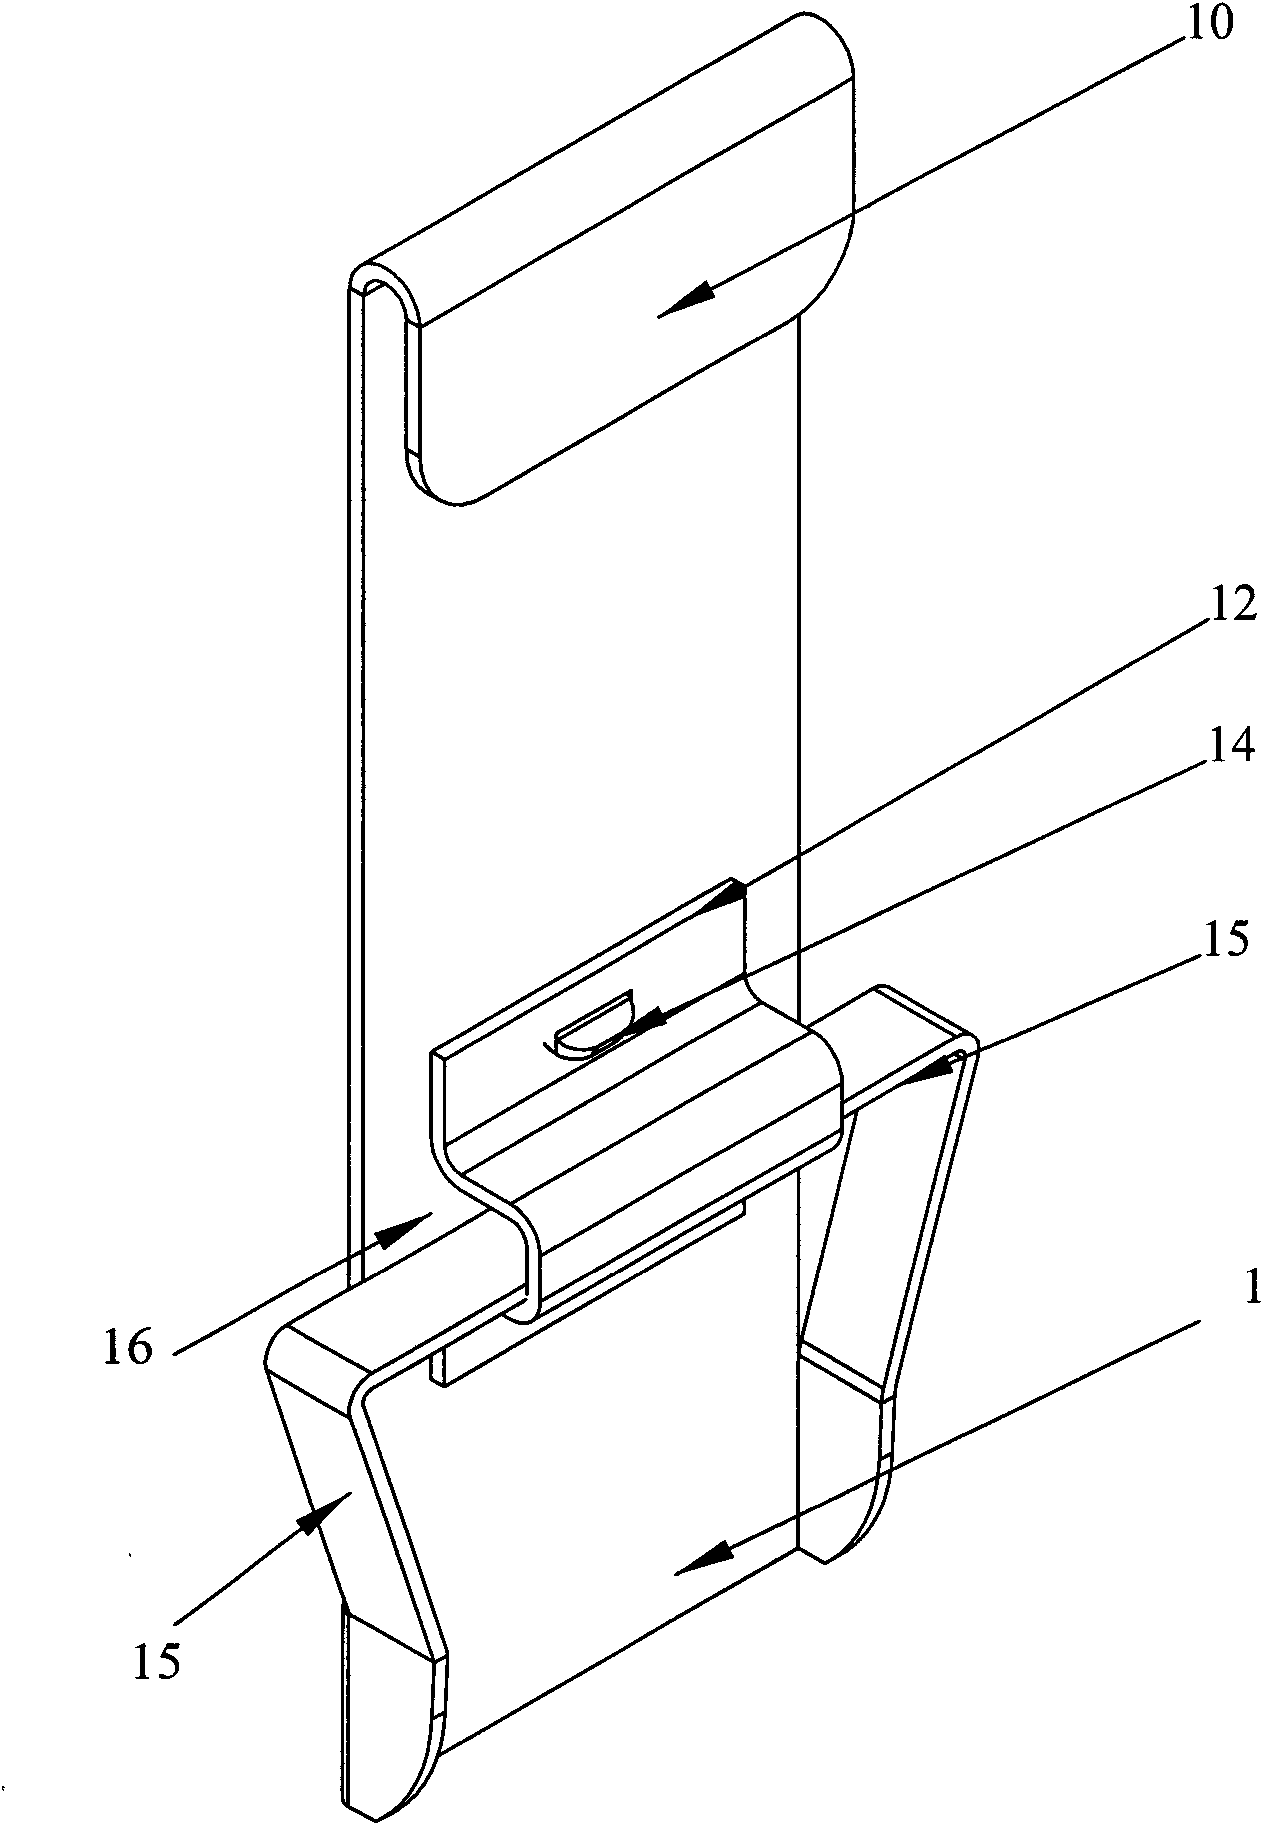 Connecting buckle element between box plates of circulating package box